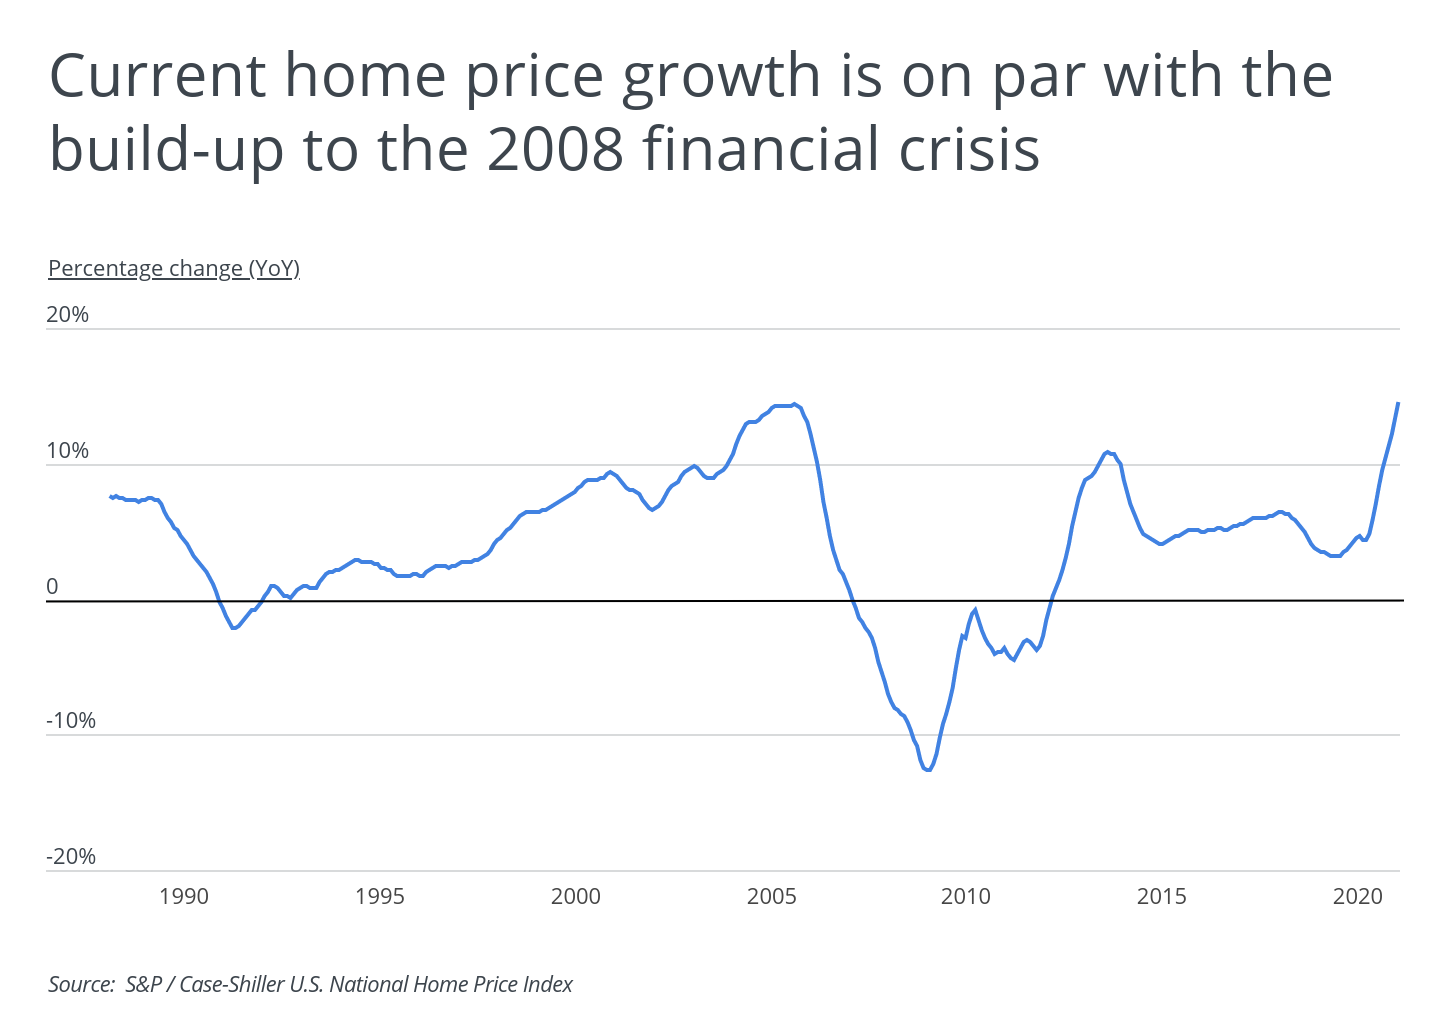 Current home price growth is on par with the build-up to the 2008 financial crisis